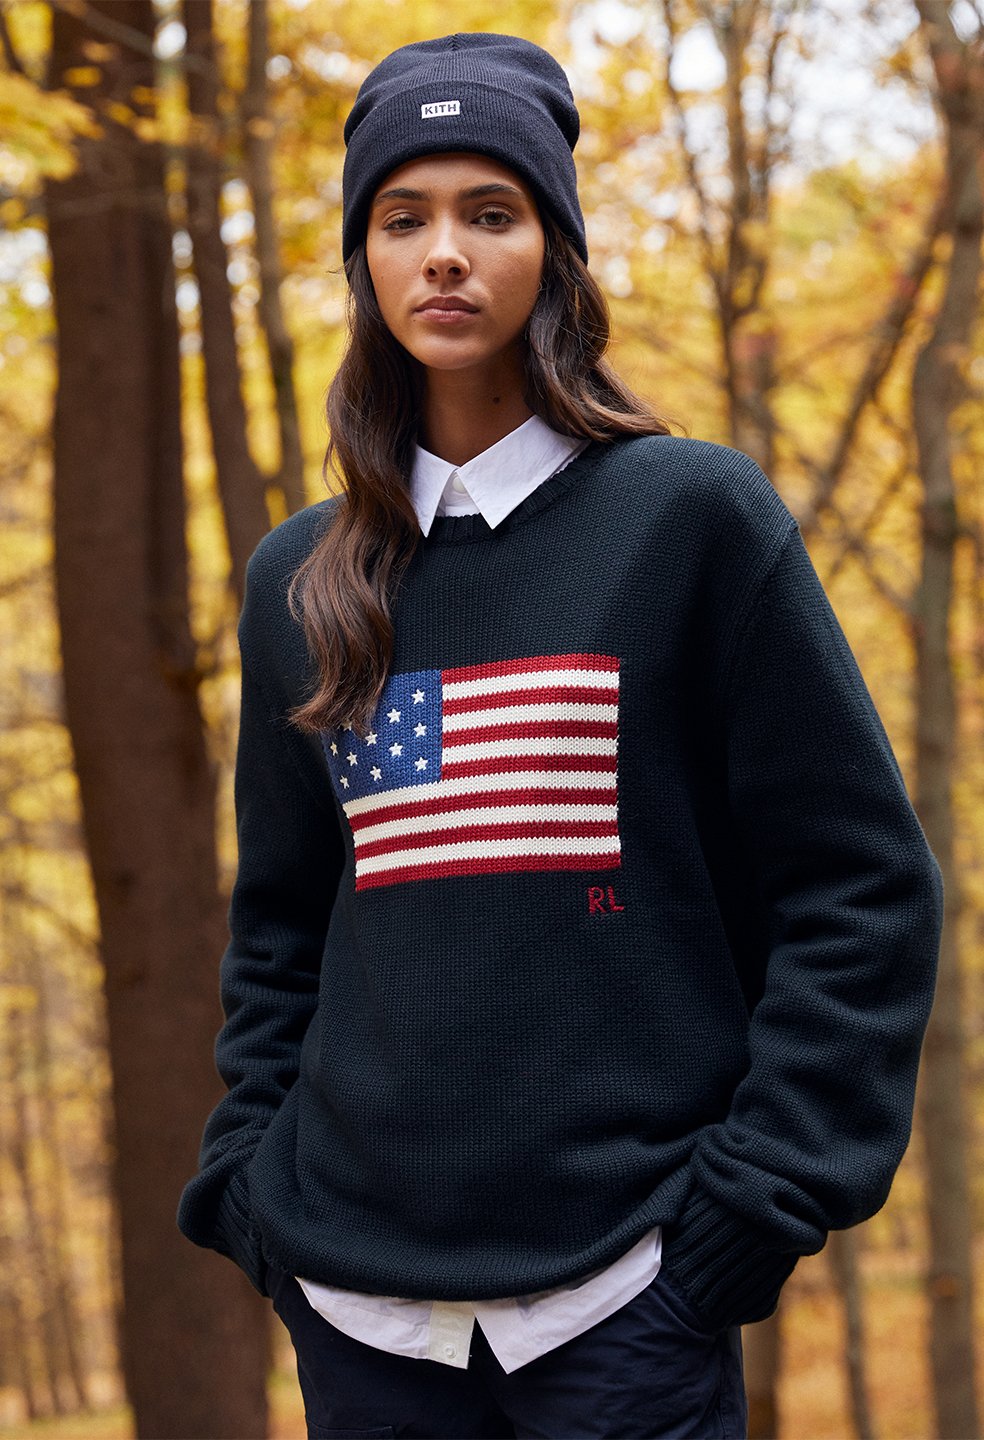 KITH Partners With Polo Ralph Lauren on a Limited Edition Collection